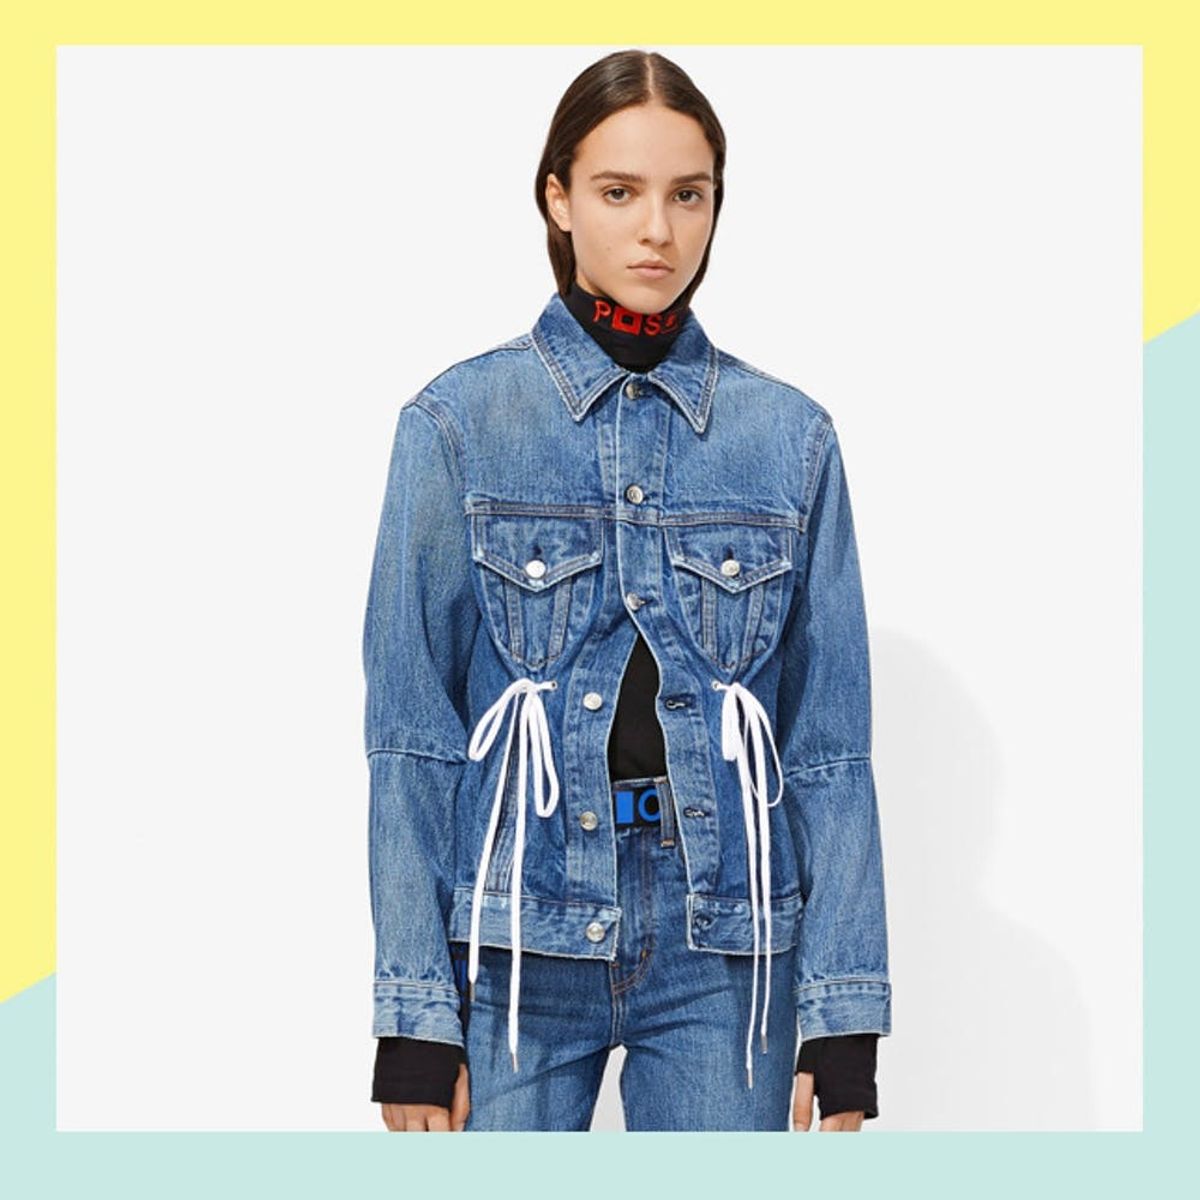 16 Anything-But-Basic Denim Jackets You’ll Want to Layer on This Season